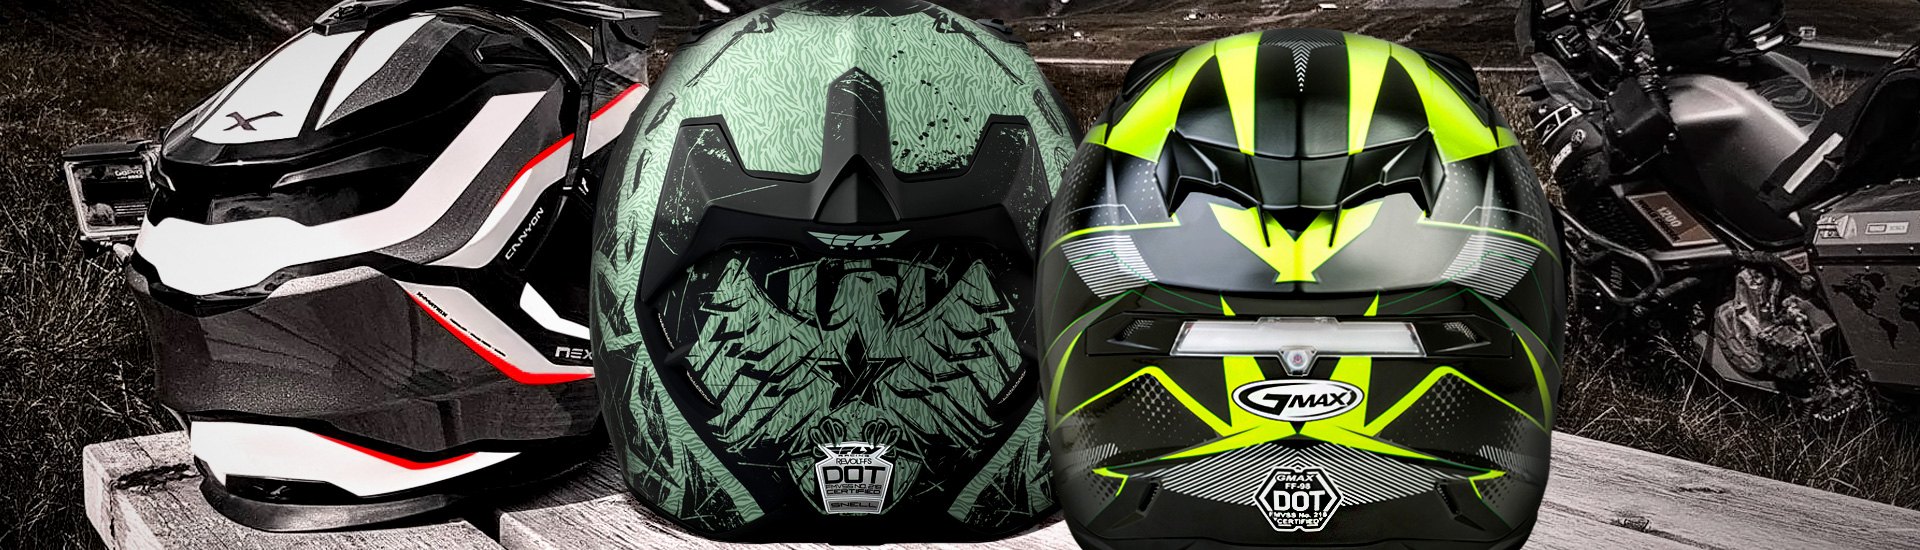 Helmet Certifications | What are the Differences among DOT, ECE, SHARP, & SNELL?